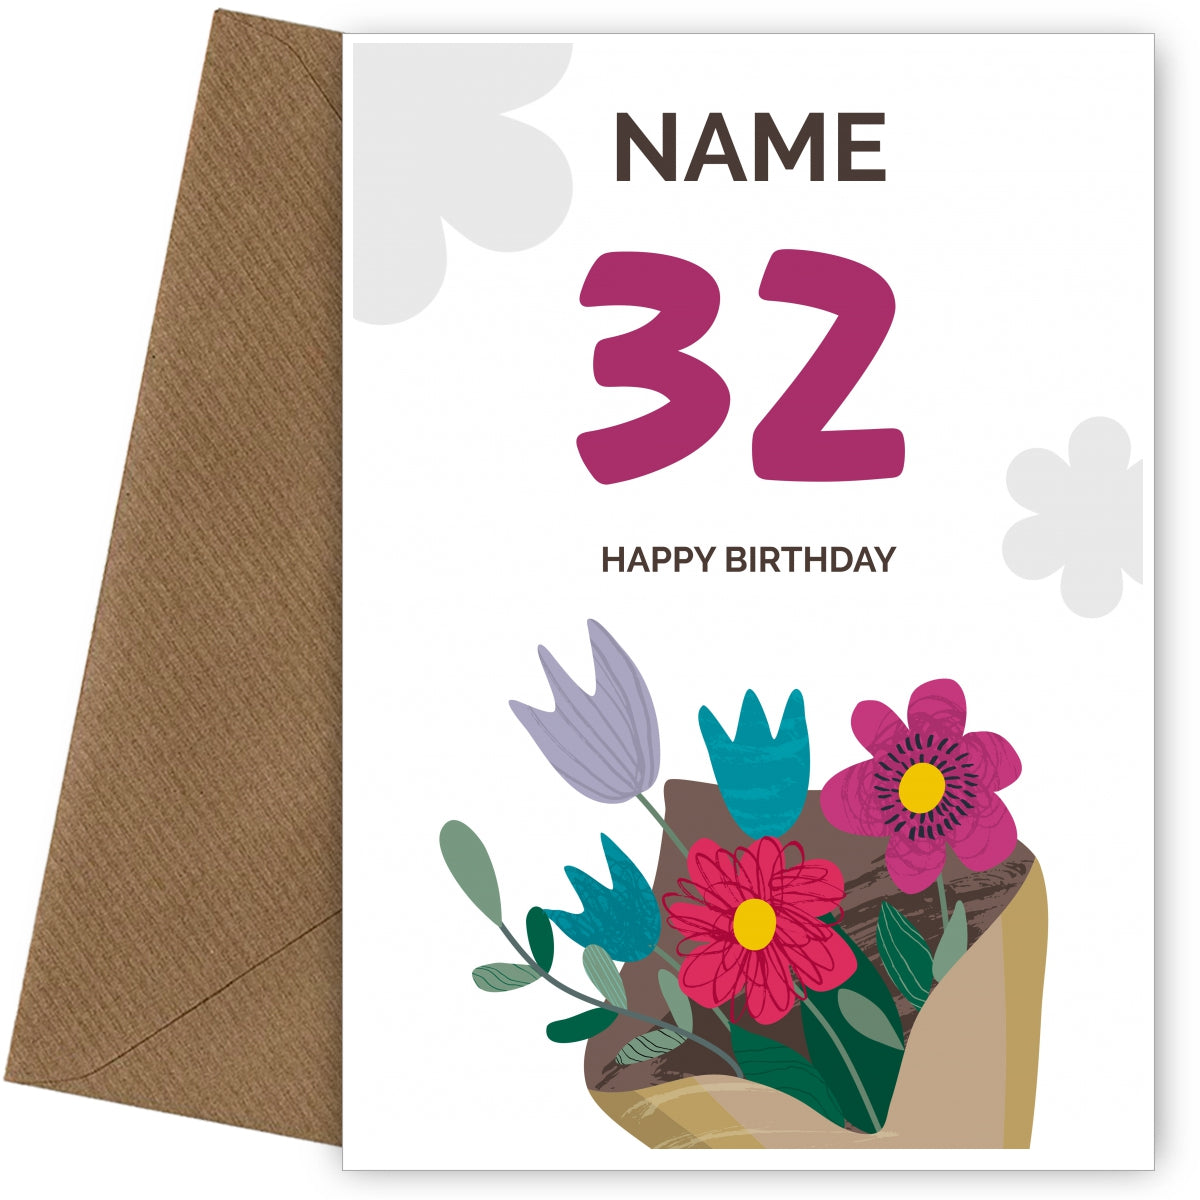 Happy 32nd Birthday Card - Bouquet of Flowers